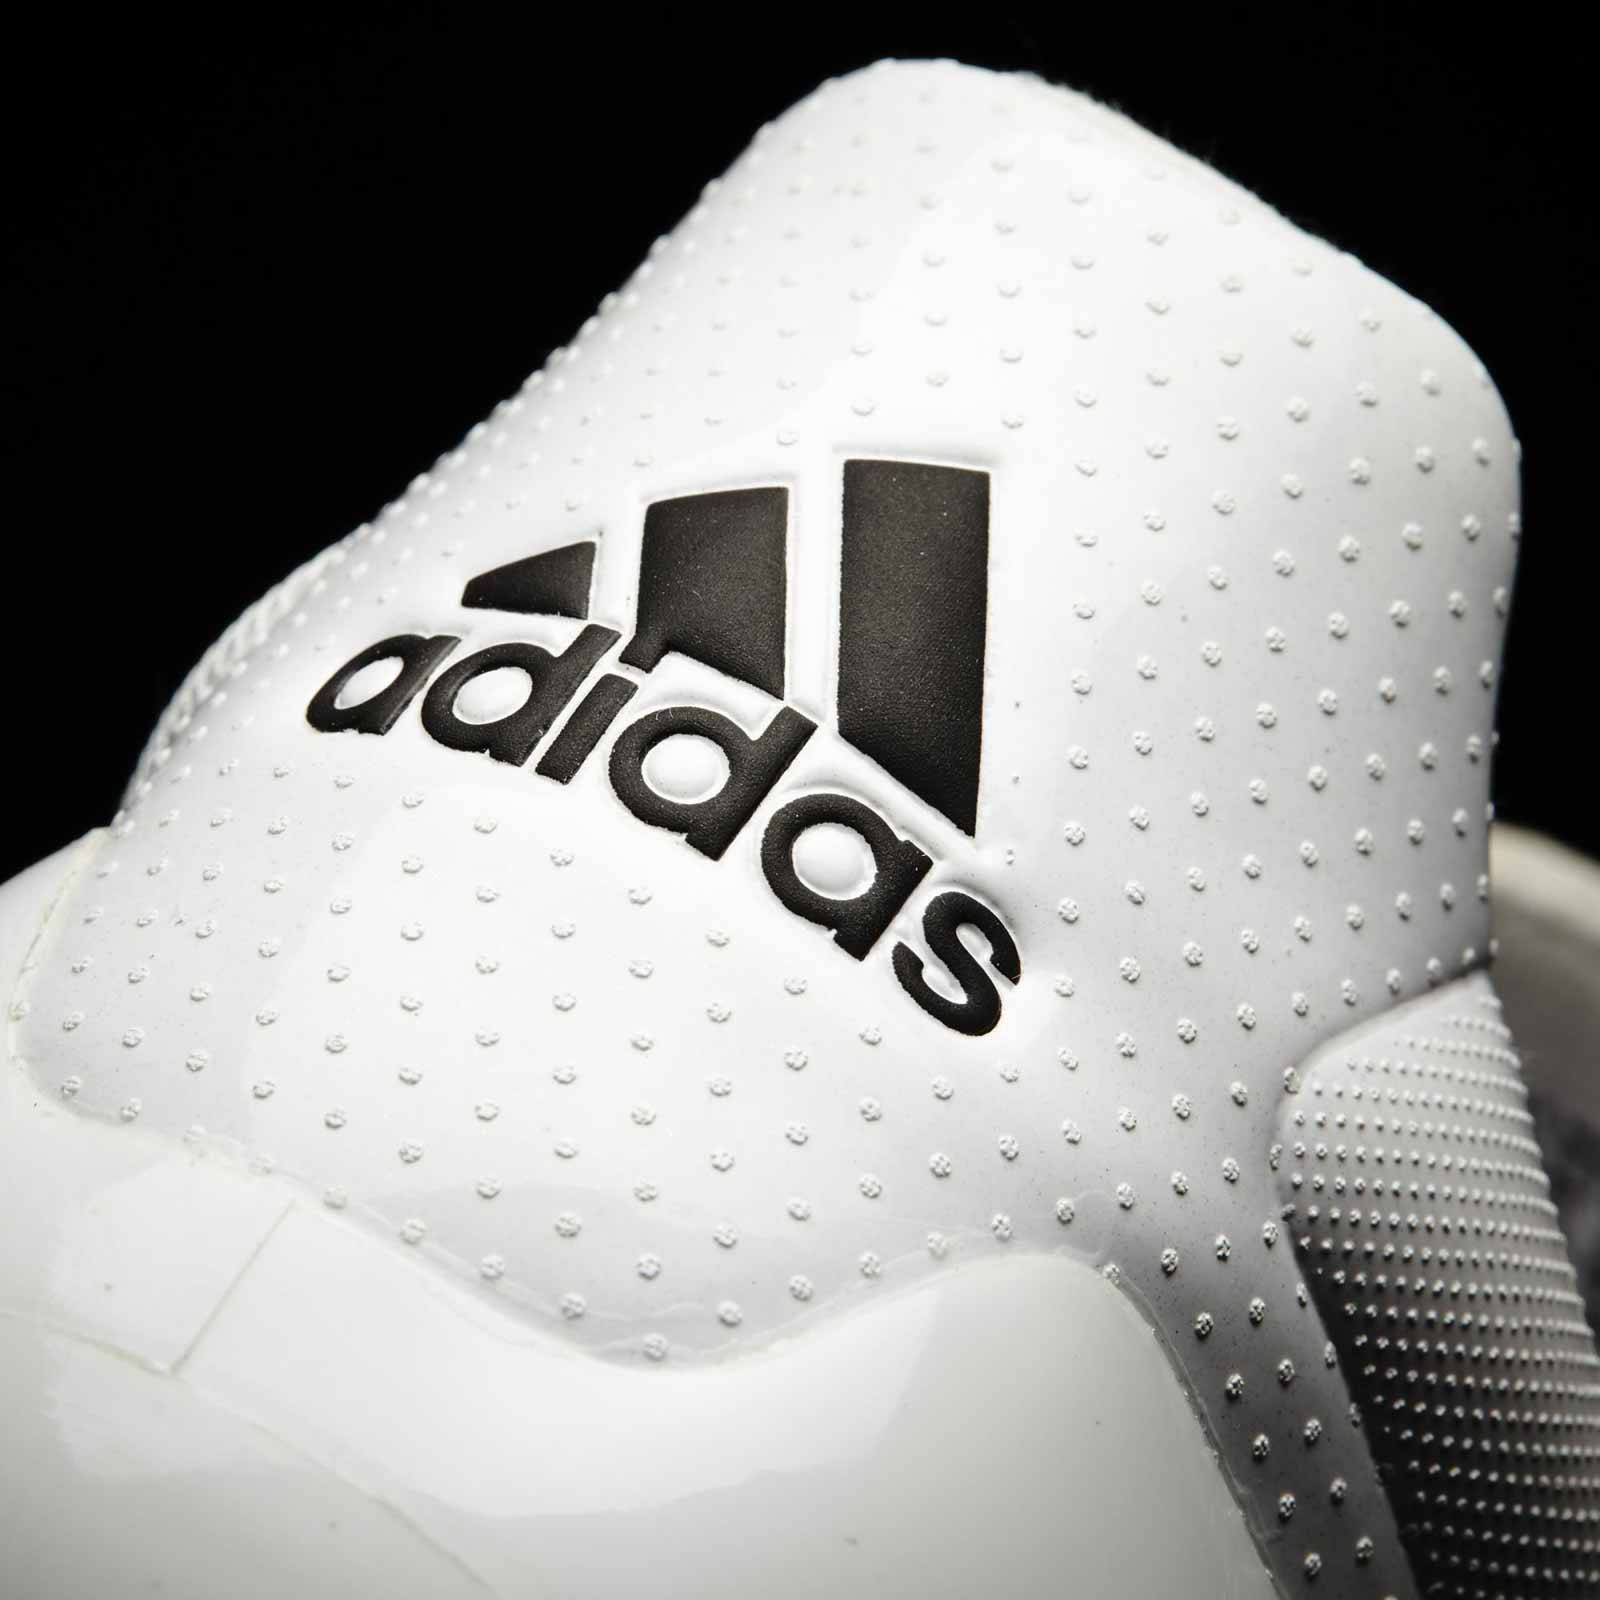 Black / White Adidas Ace 2015-2016 Leather Boots Released - Footy Headlines